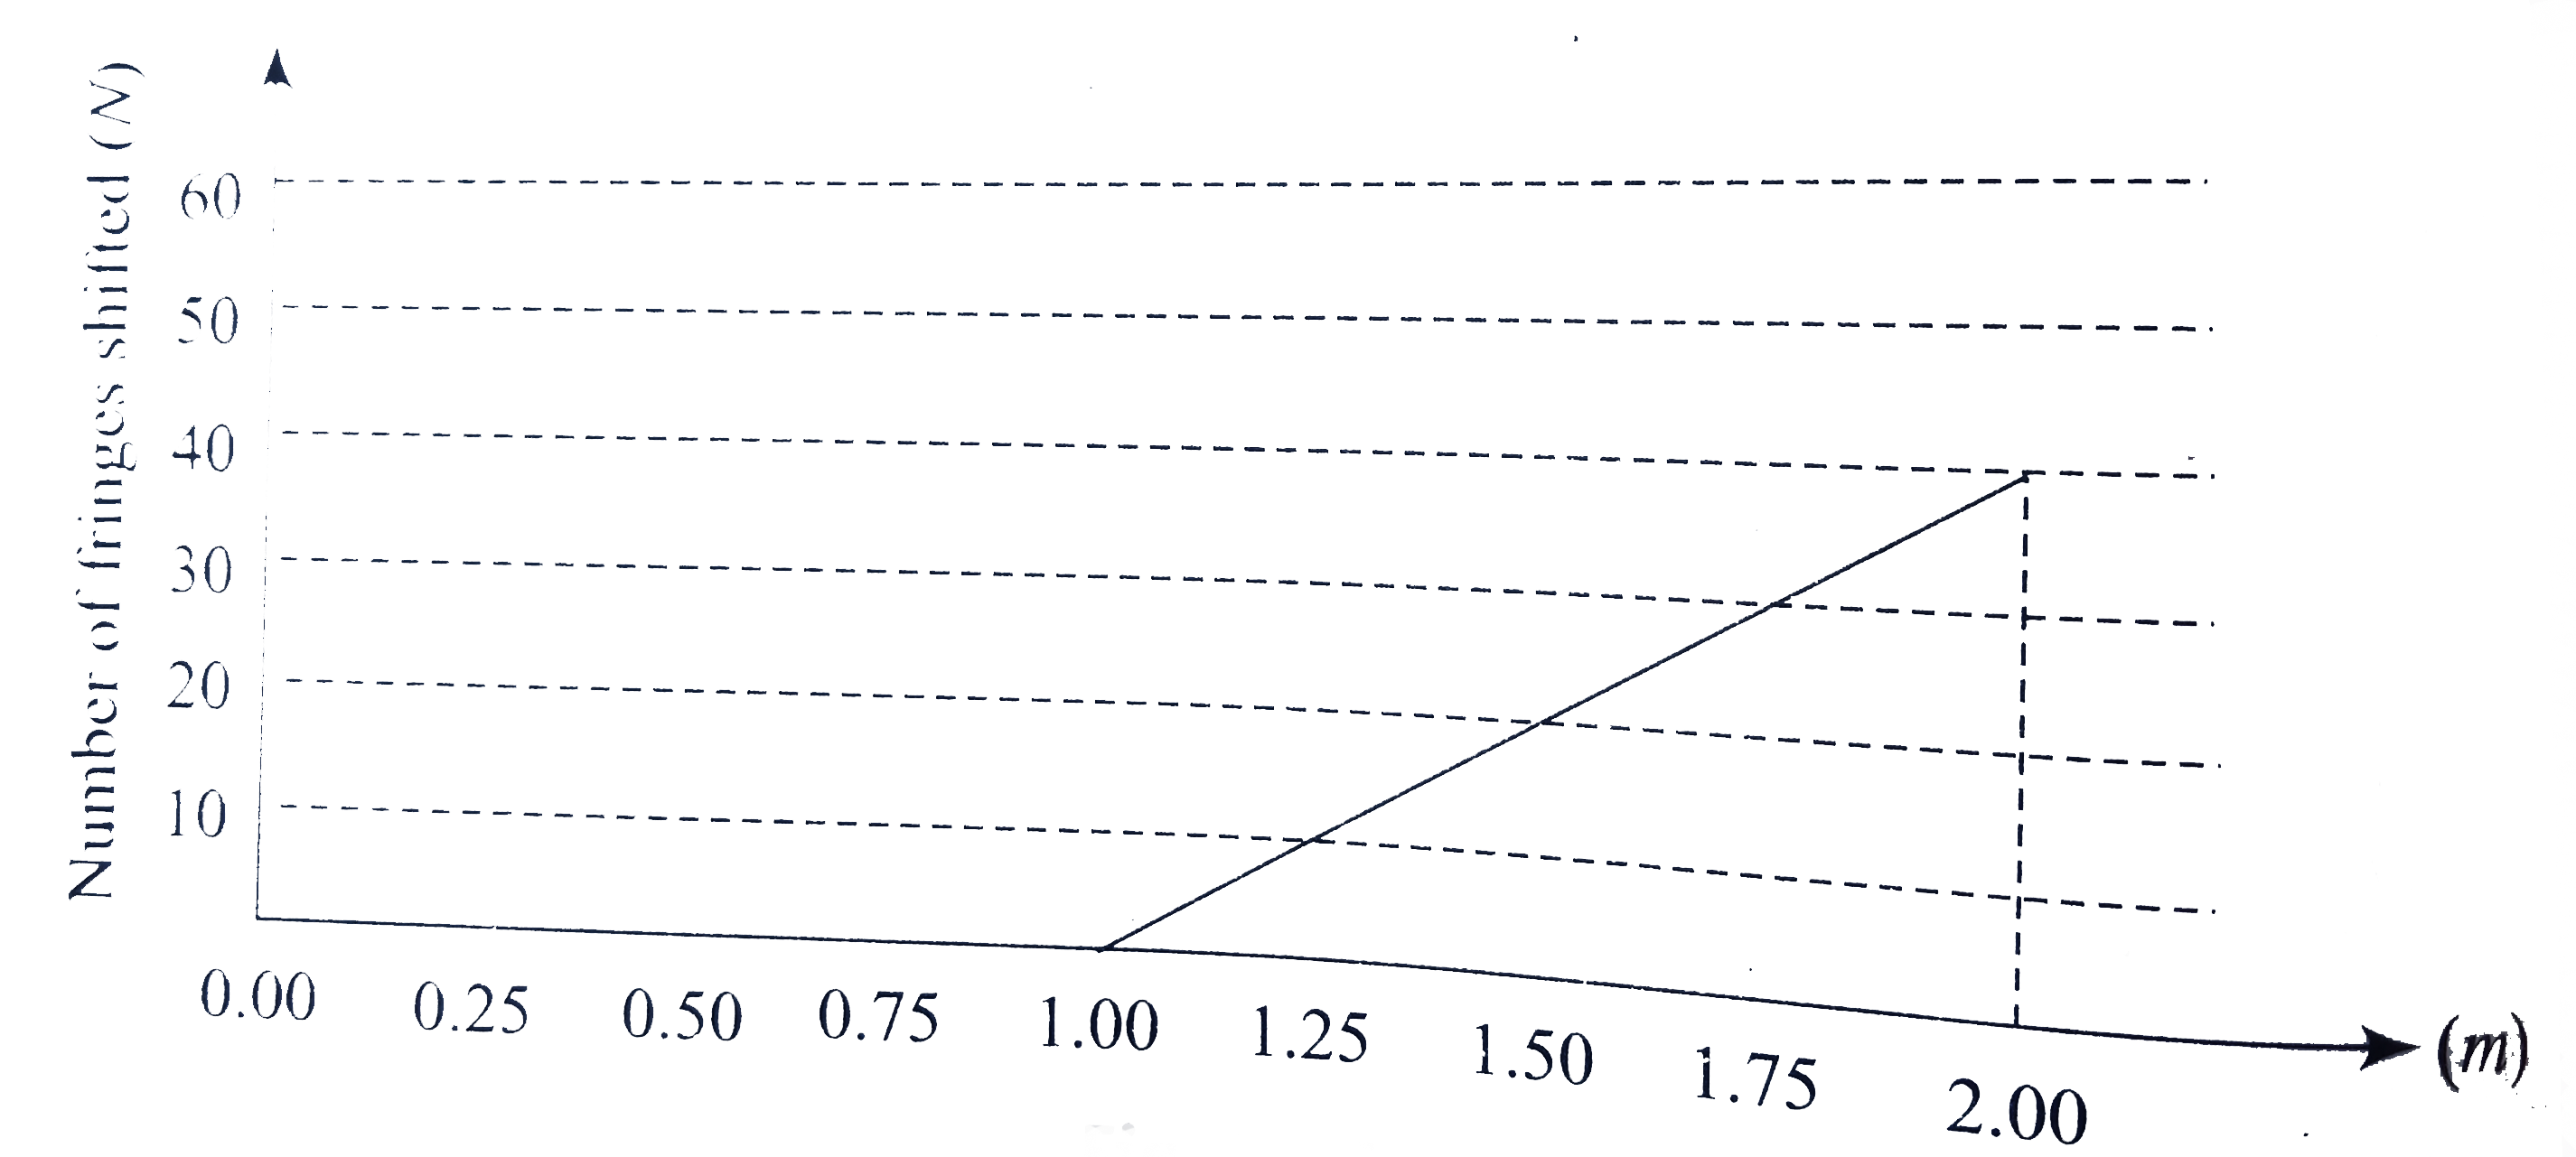 The slits in a double-slit interference experiment are illuminated by orange light (lambda = 60 nm). A thin transparent plastic of thickness t is placed in front of one of the slits. The nunber of fringes shifting on screen is plotted versus the refractive index mu of the plastic in graph shown in figure. The value of t is